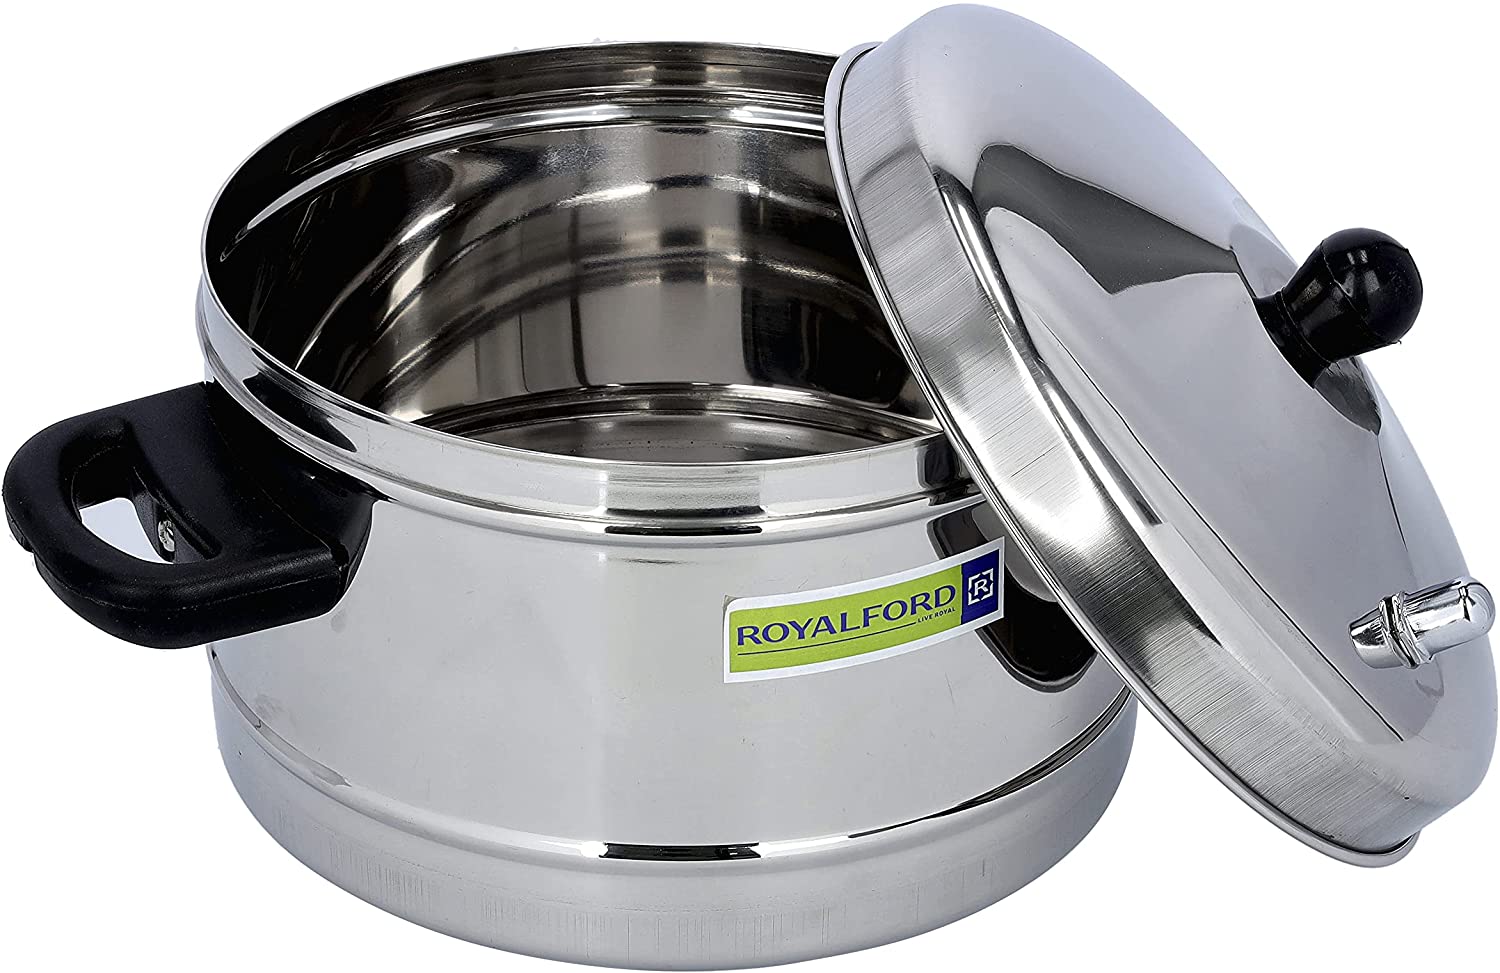 Royalford Stainless Steel Idly Cooker | Capacity 4L | Color Silver | Best Kitchen Appliances in Bahrain | Halabh